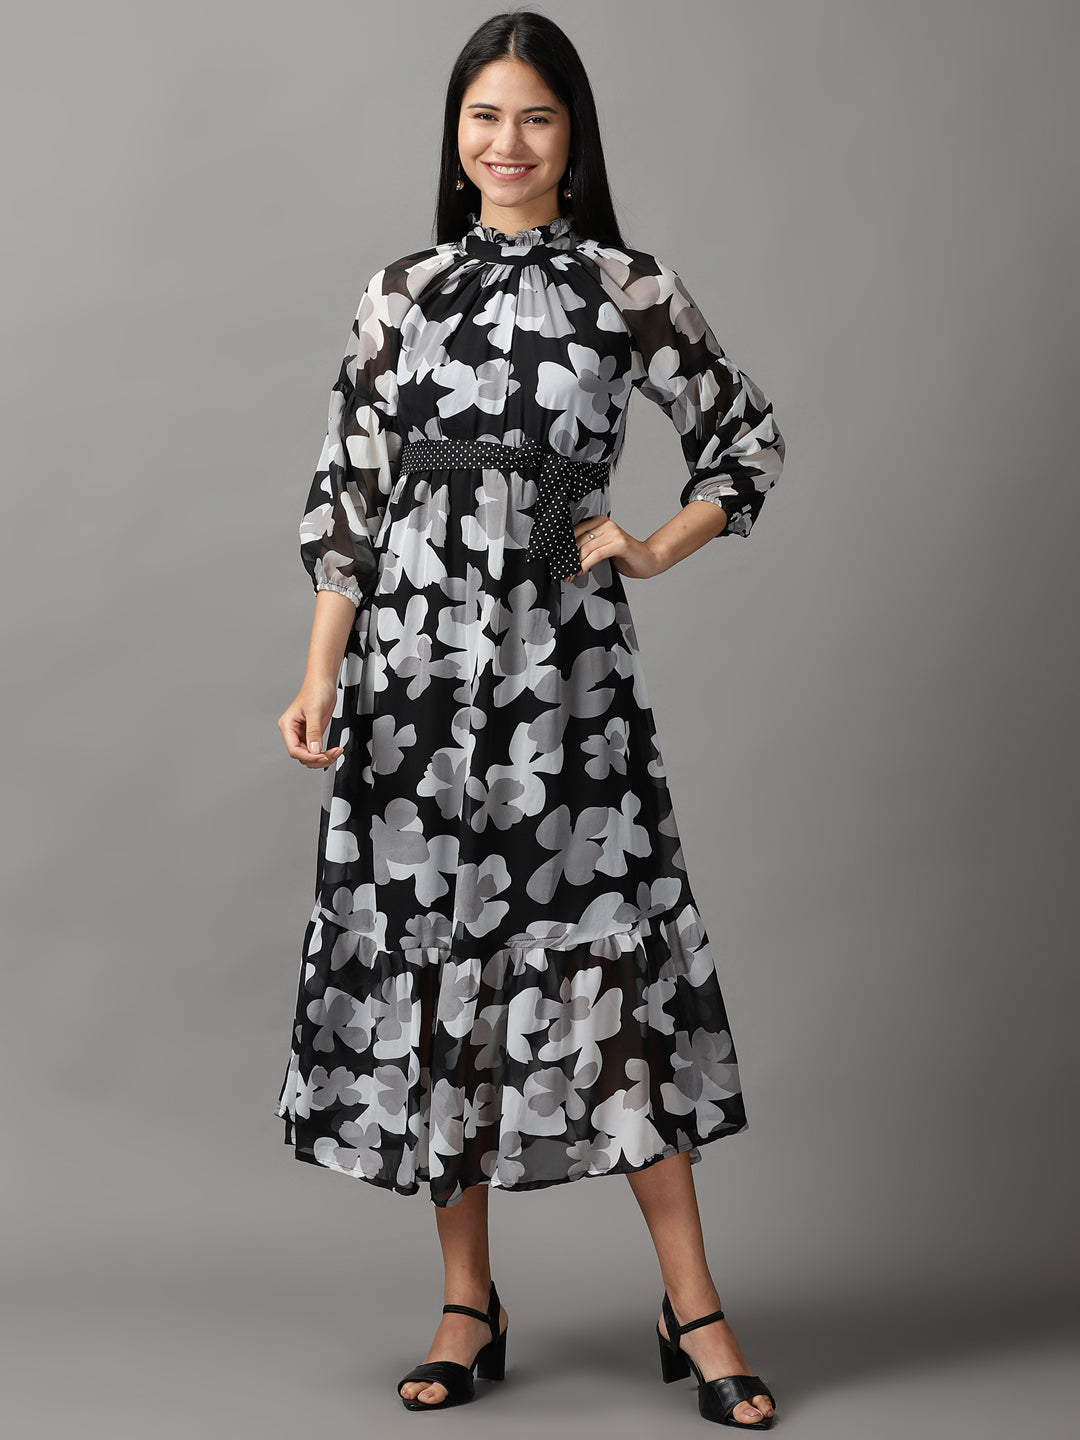 Women's Black Floral Fit and Flare Dress